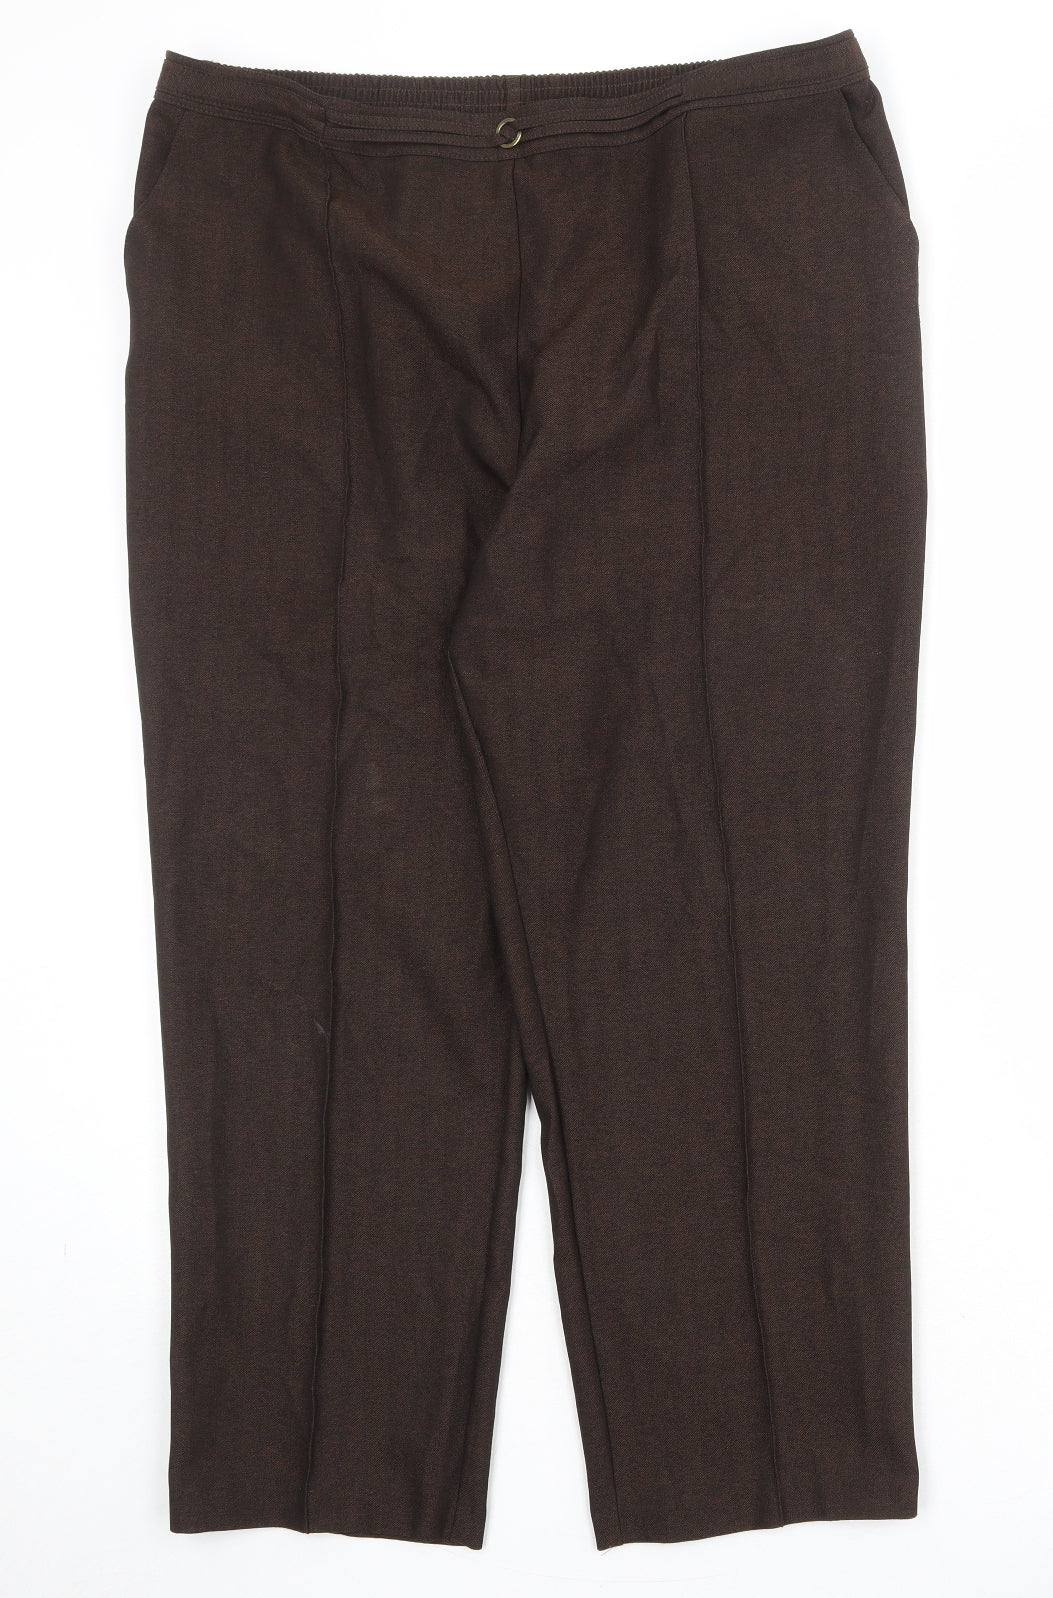 Marks and Spencer Womens Brown Polyester Trousers Size 18 Regular